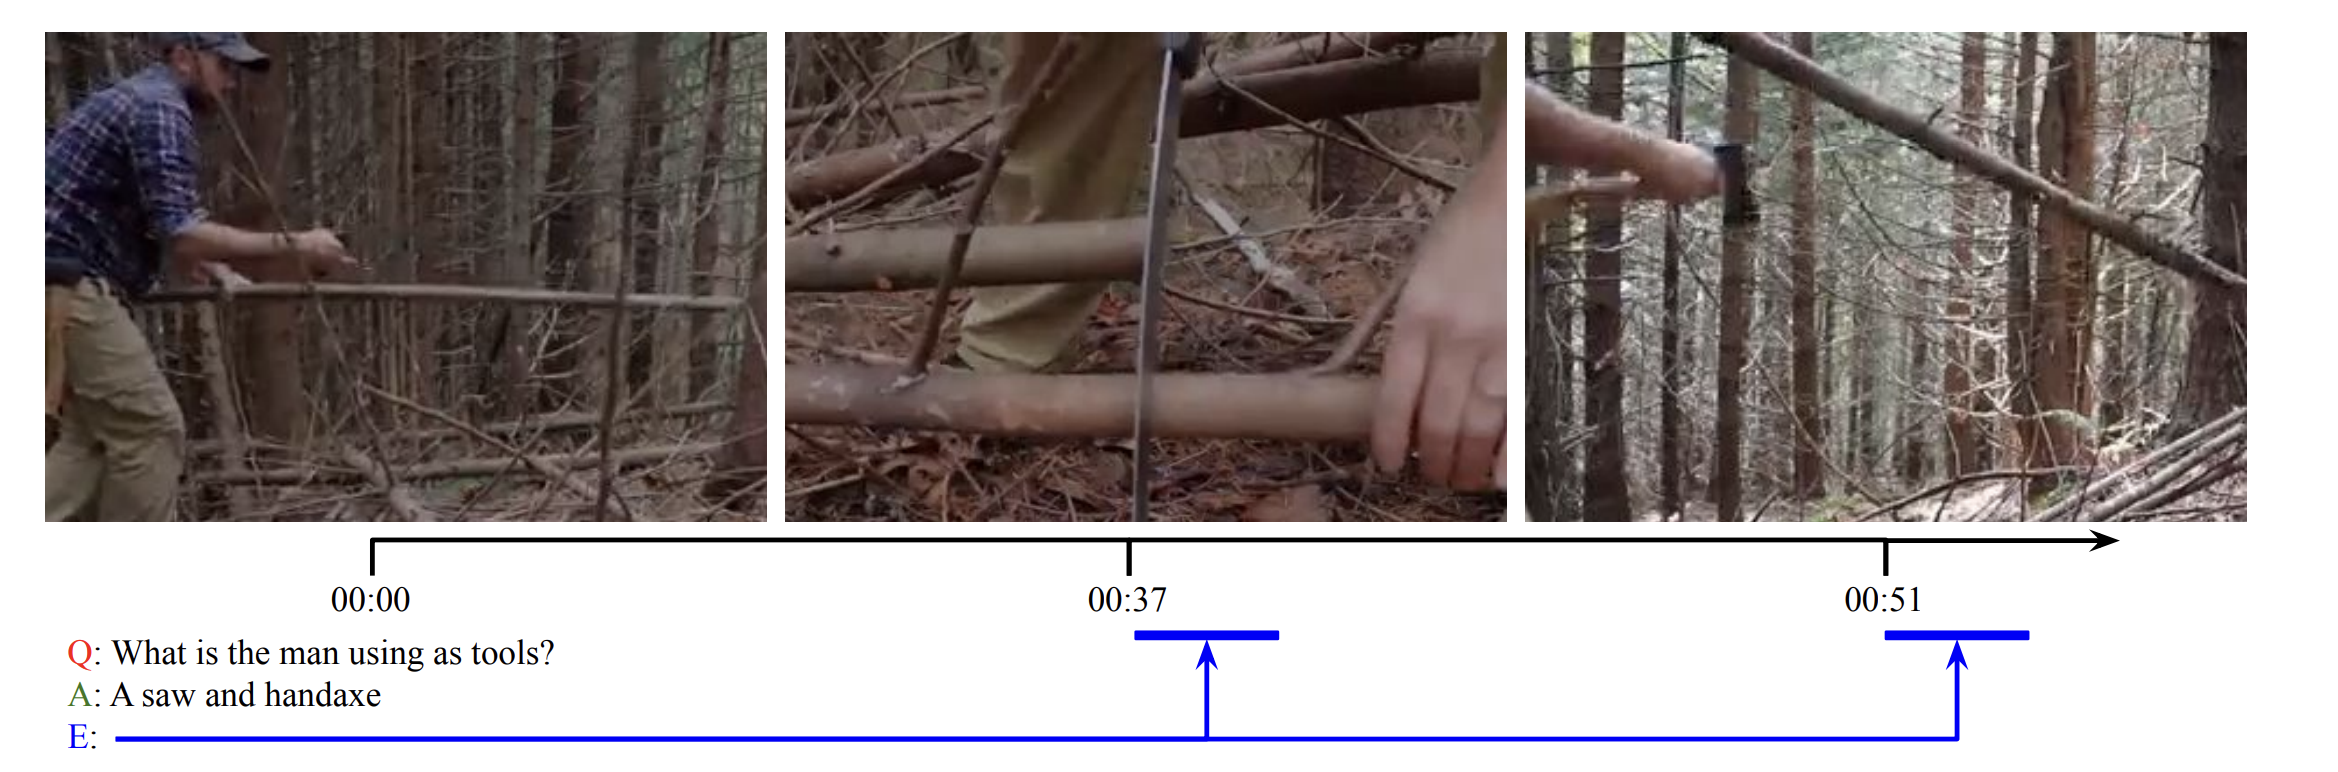 Man in forest using bow saw and handaxe on tree branch, with timestamps 00:00, 00:37, and 00:51, indicating action progression